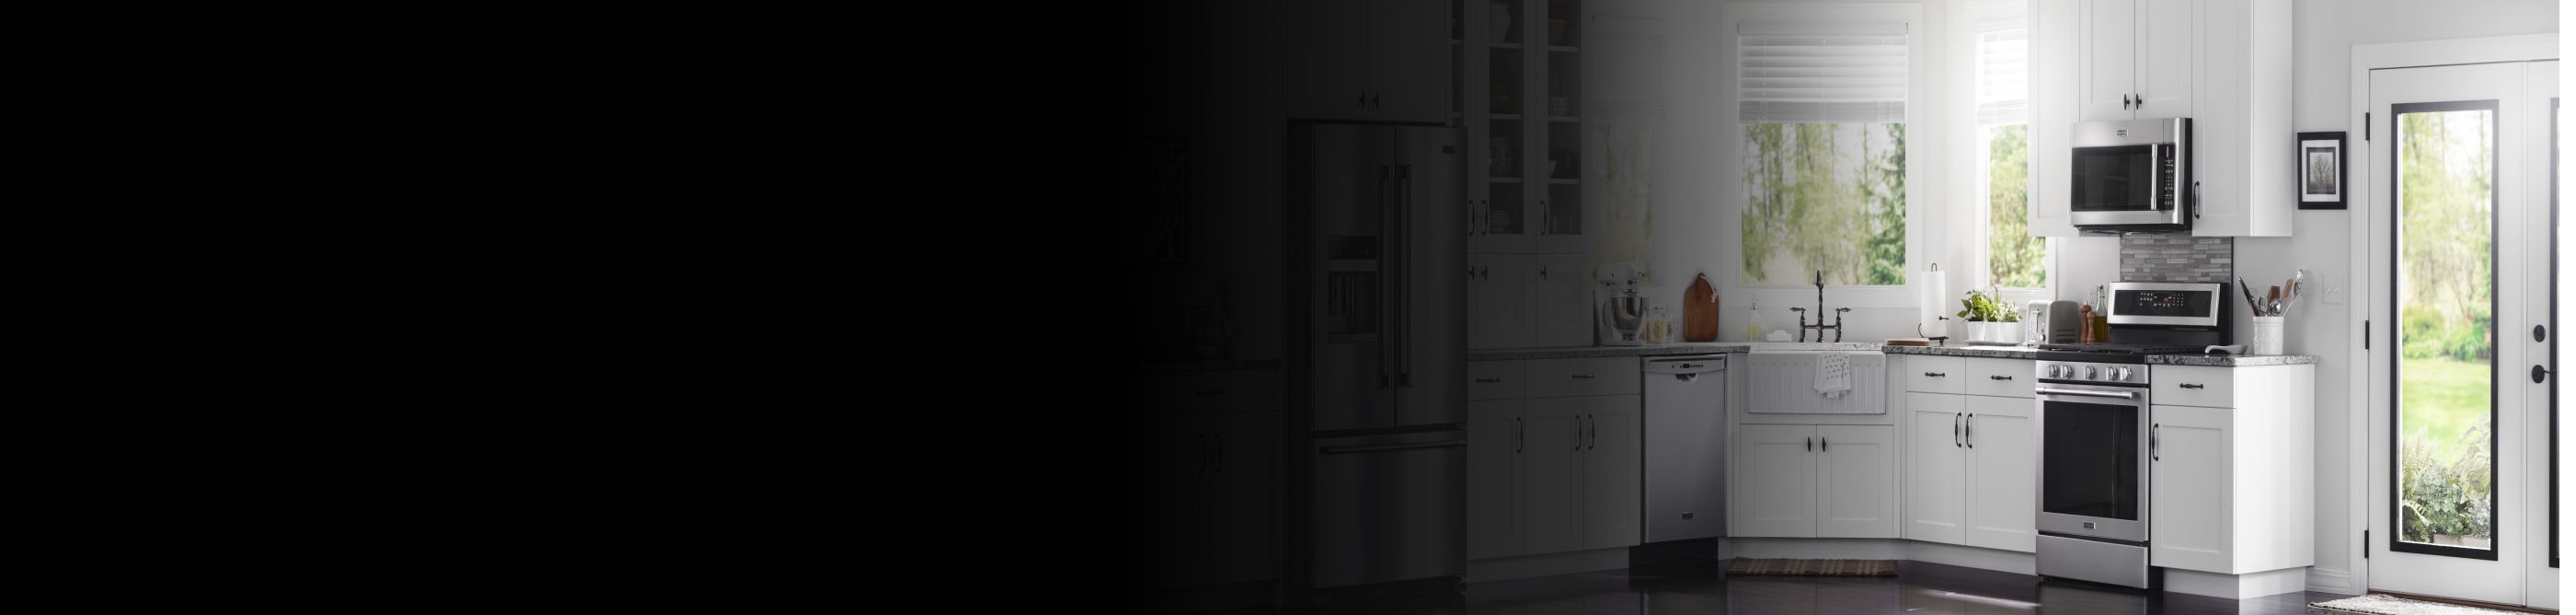 A Maytag® oven and over-the-range microwave in a modern kitchen.